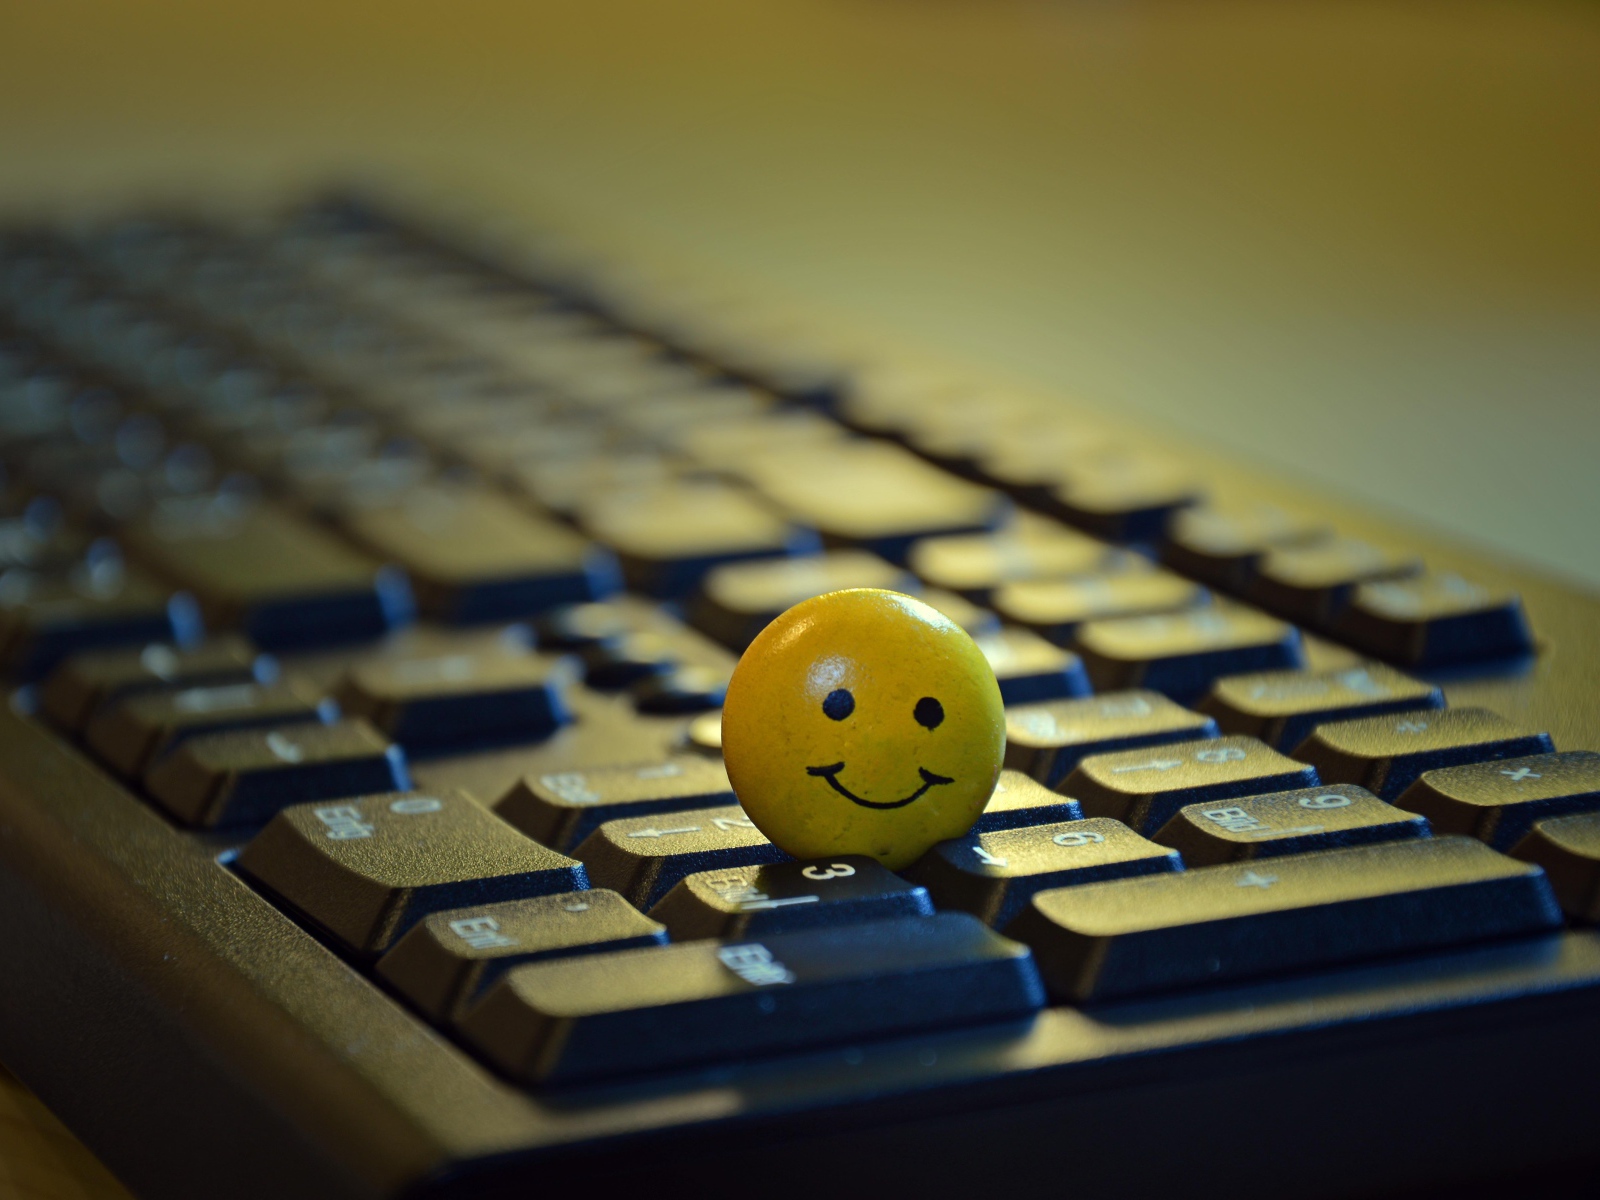 Yellow smiley face on black keyboard